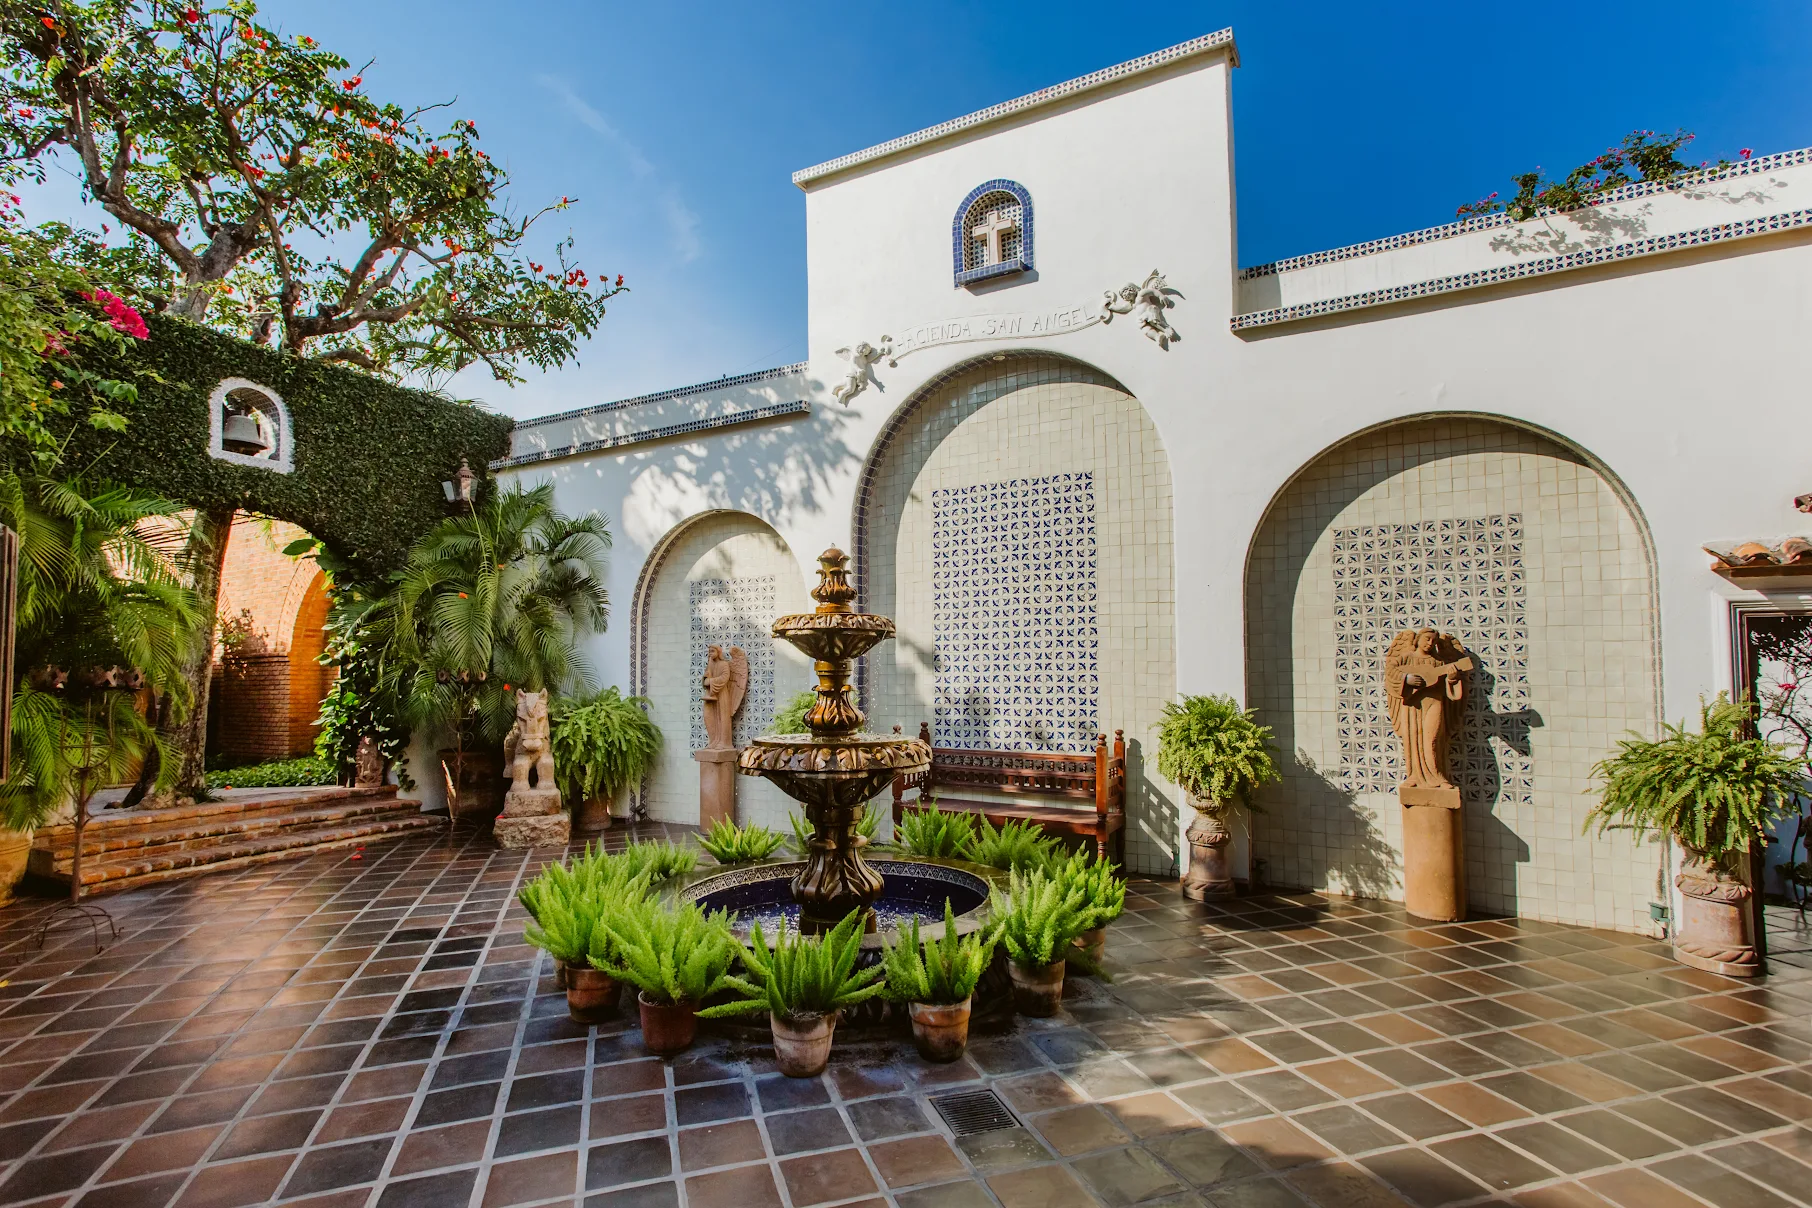 HACIENDA SAN ANGEL: ONE OF THE BEST HOTELS IN PUERTO VALLARTA WAS ONCE HOME TO RICHARD AND SUZY BURTON